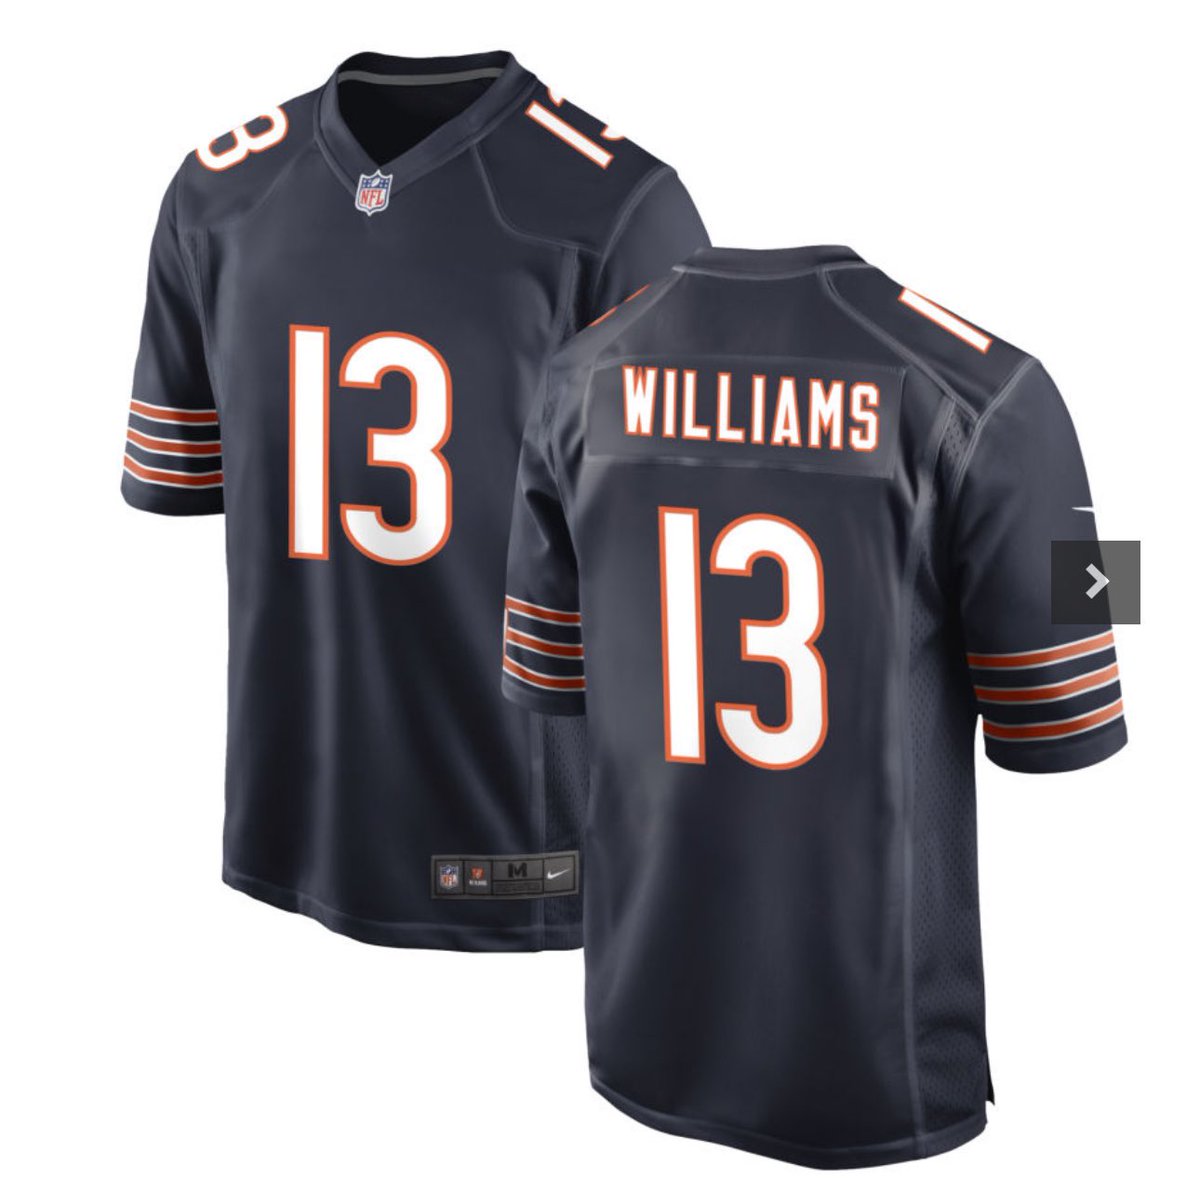 🚨CALEB WILLAMS JERSEY GIVEAWAY

The #Bears select their new franchise QB with the #1 pick! 

We’re giving away his jersey, and you can win it. To enter;

-Follow @OfficialJAYCHI 
-Like & RT this tweet
-Comment “🐻⬇️”

Winner selected 4/28!  

*Make sure it’s us if selected*